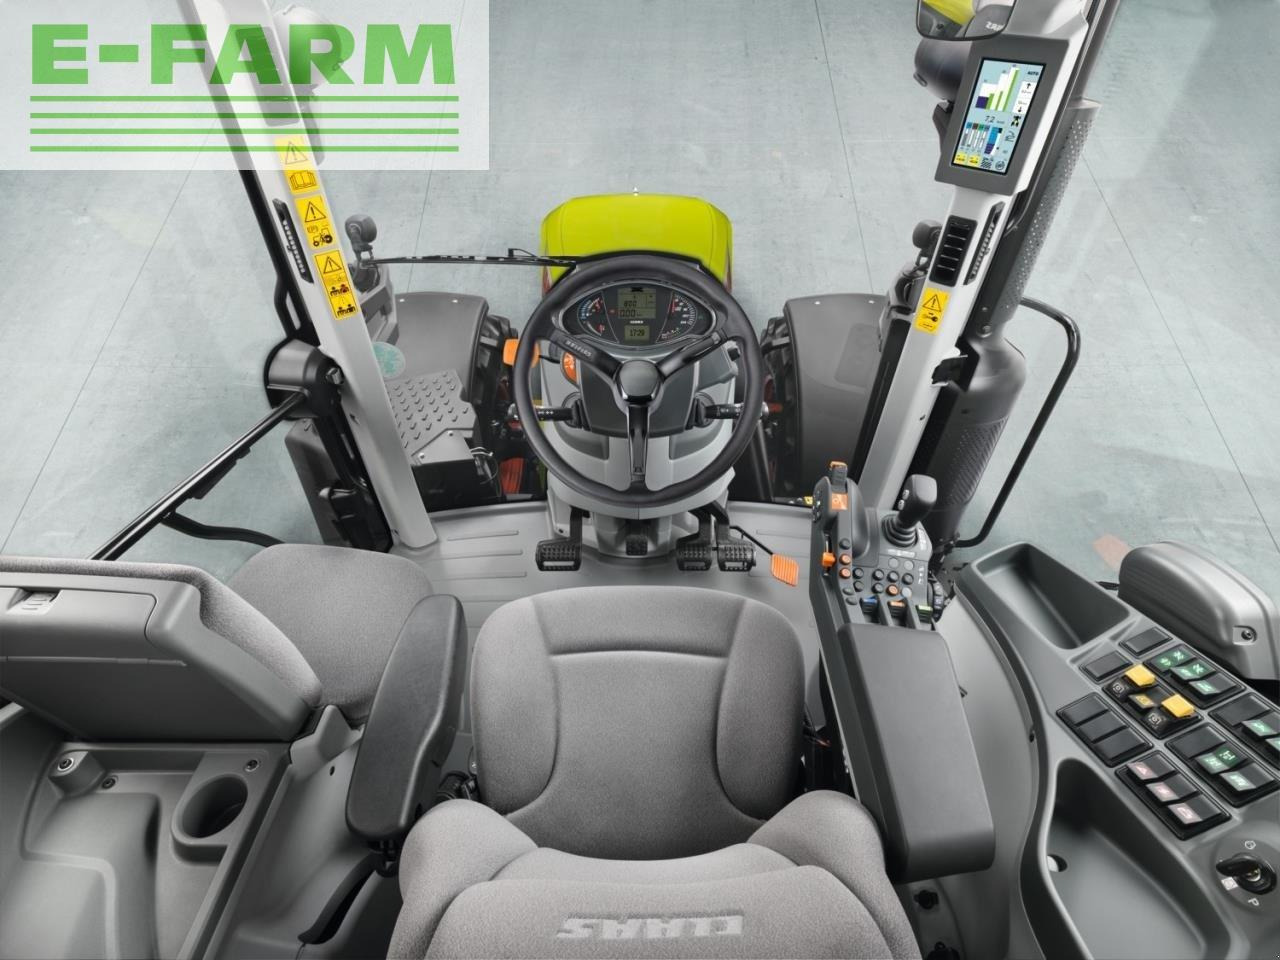 Tractor CLAAS arion 650 cis+